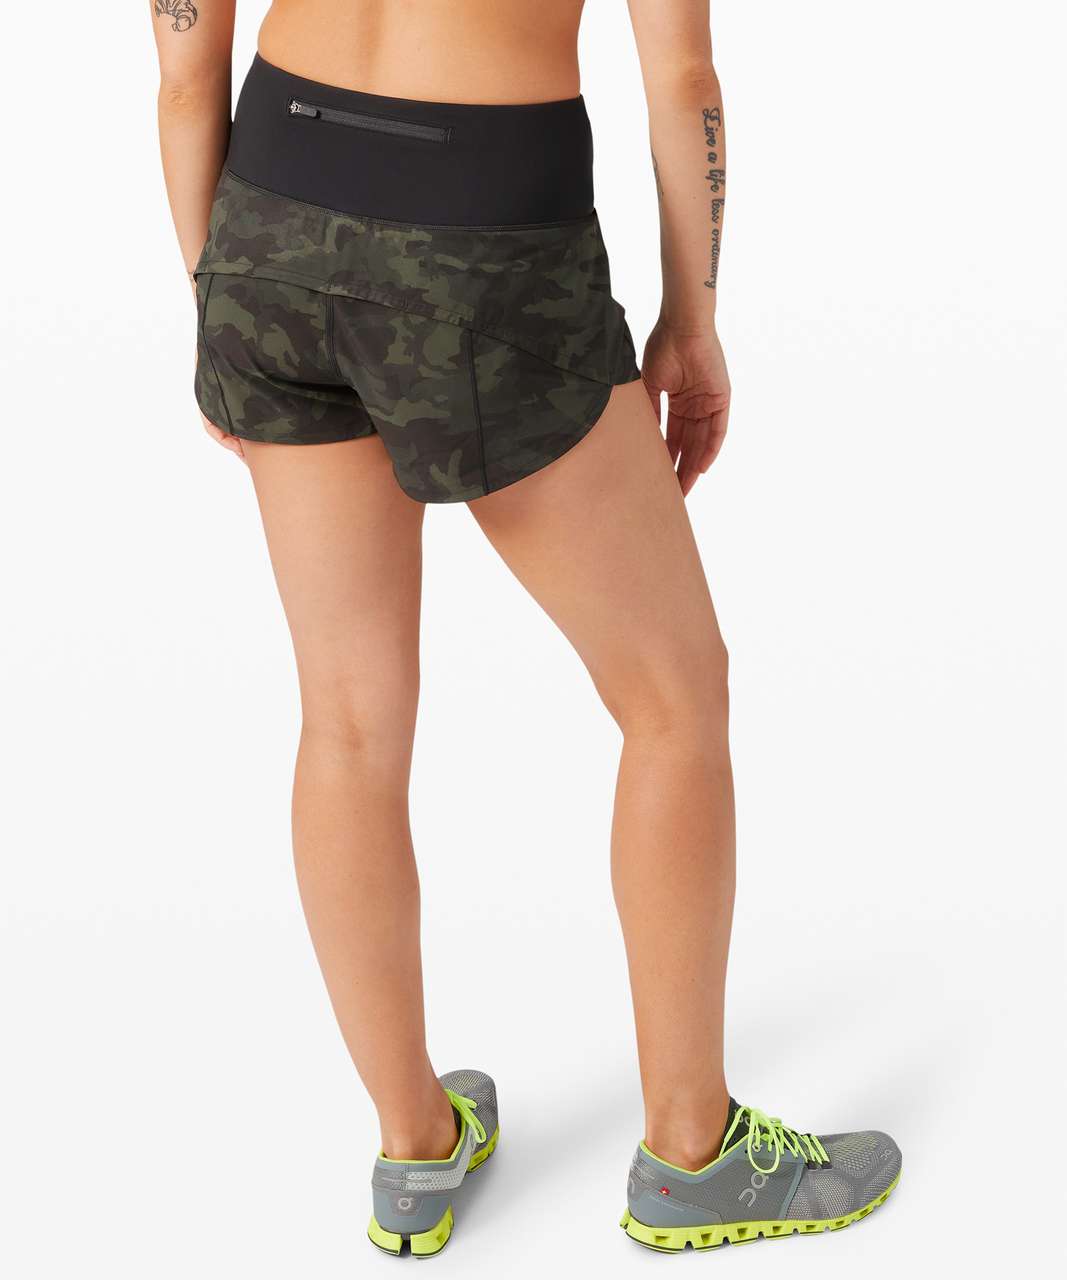 Lululemon Speed Up Short High-rise *2.5 In Incognito Camo Multi